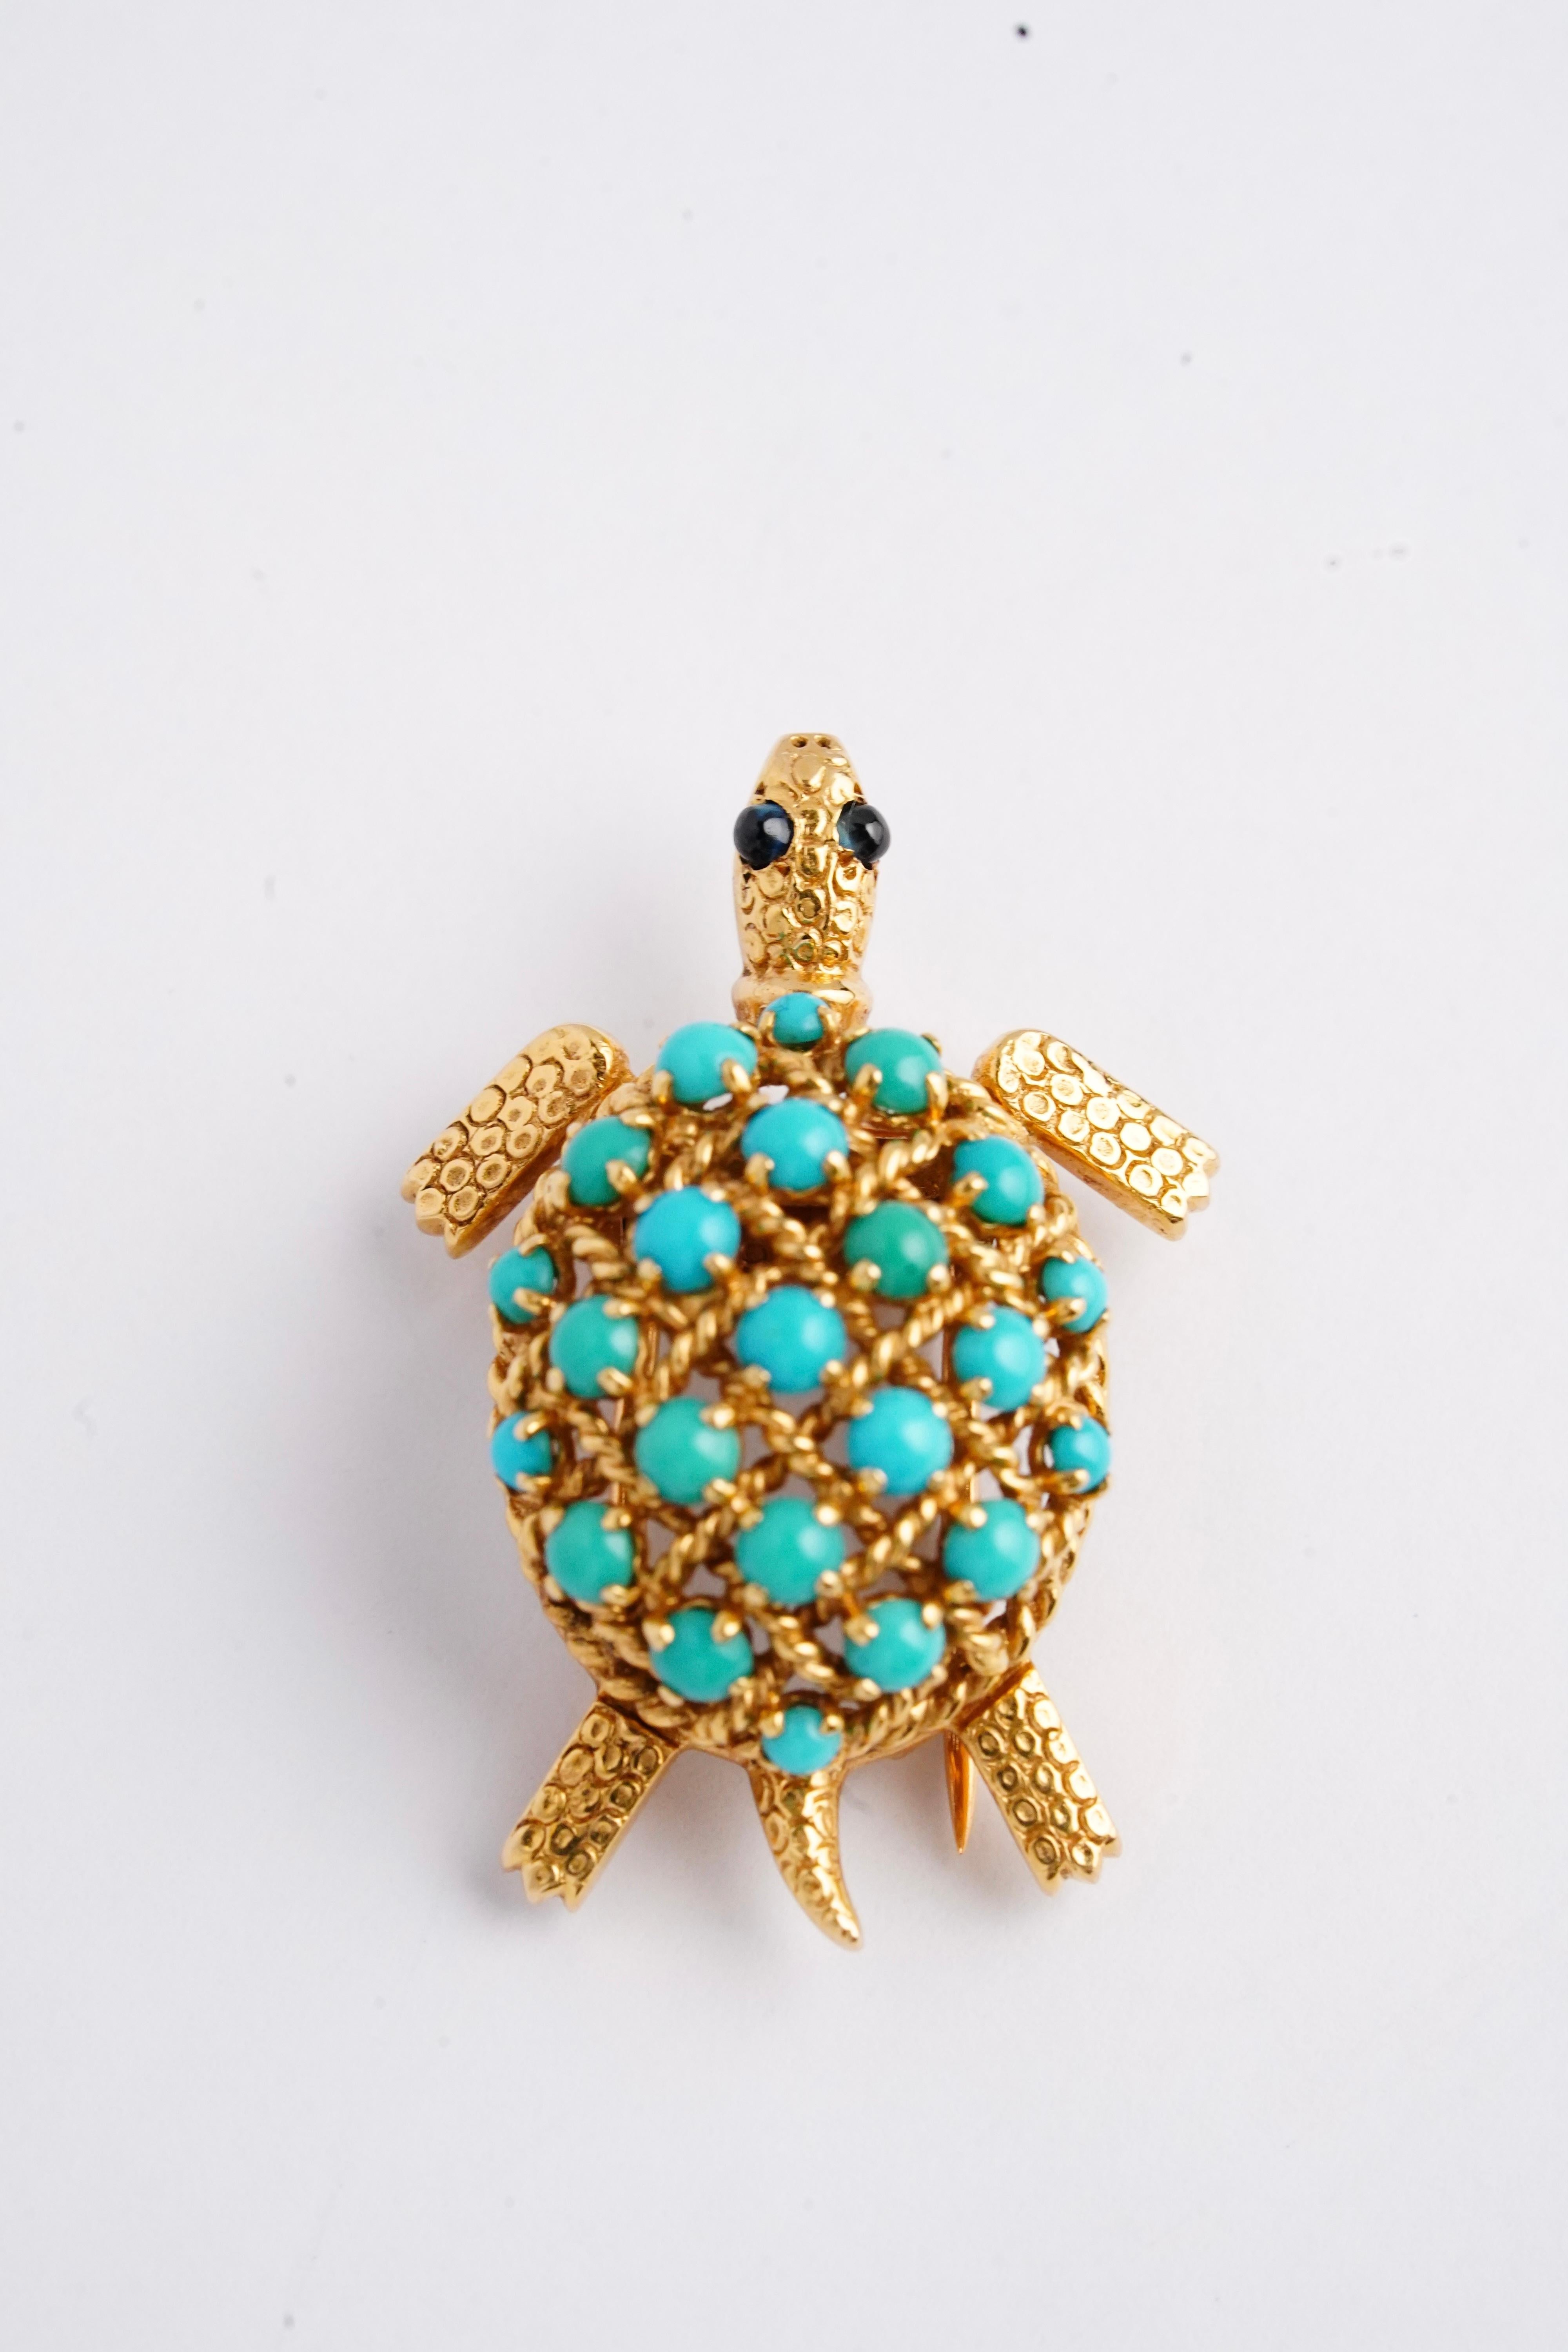 The adorable vintage lapel clip/brooch is such a fun and unique piece! It features a sweet little turtle, with its head and flippers peeking out of its shell, made up in 18K yellow gold and a variety of different types of stone. This piece was